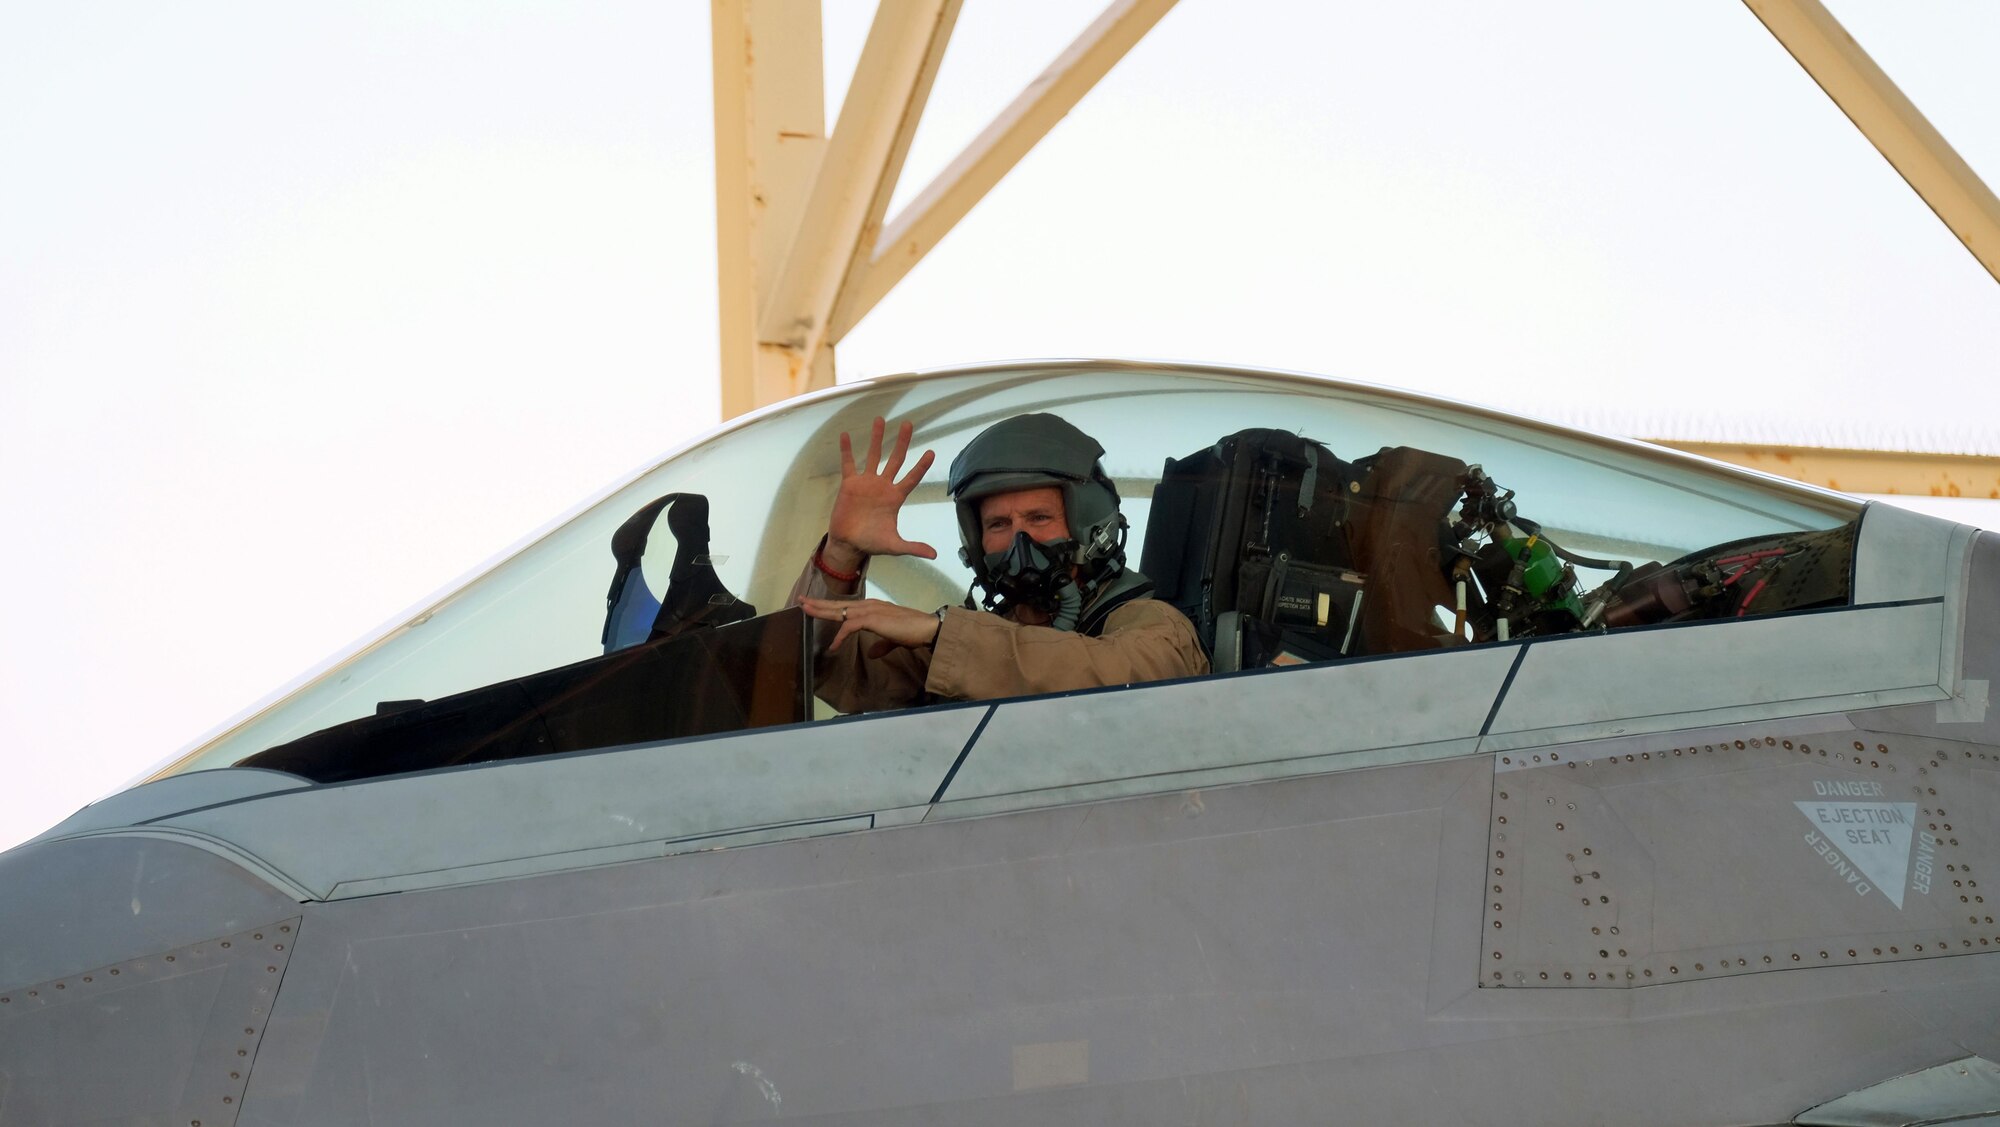 Brig. Gen. Charles S. Corcoran, 380th Air Expeditionary Wing commander, waves to Airmen of the 380 AEW at his fini-flight June 30, 2017, at an undisclosed location in southwest Asia. Corcoran is an experienced command pilot with more than 3,000 flying hours. (U.S. Air Force photo by Senior Airman Preston Webb)